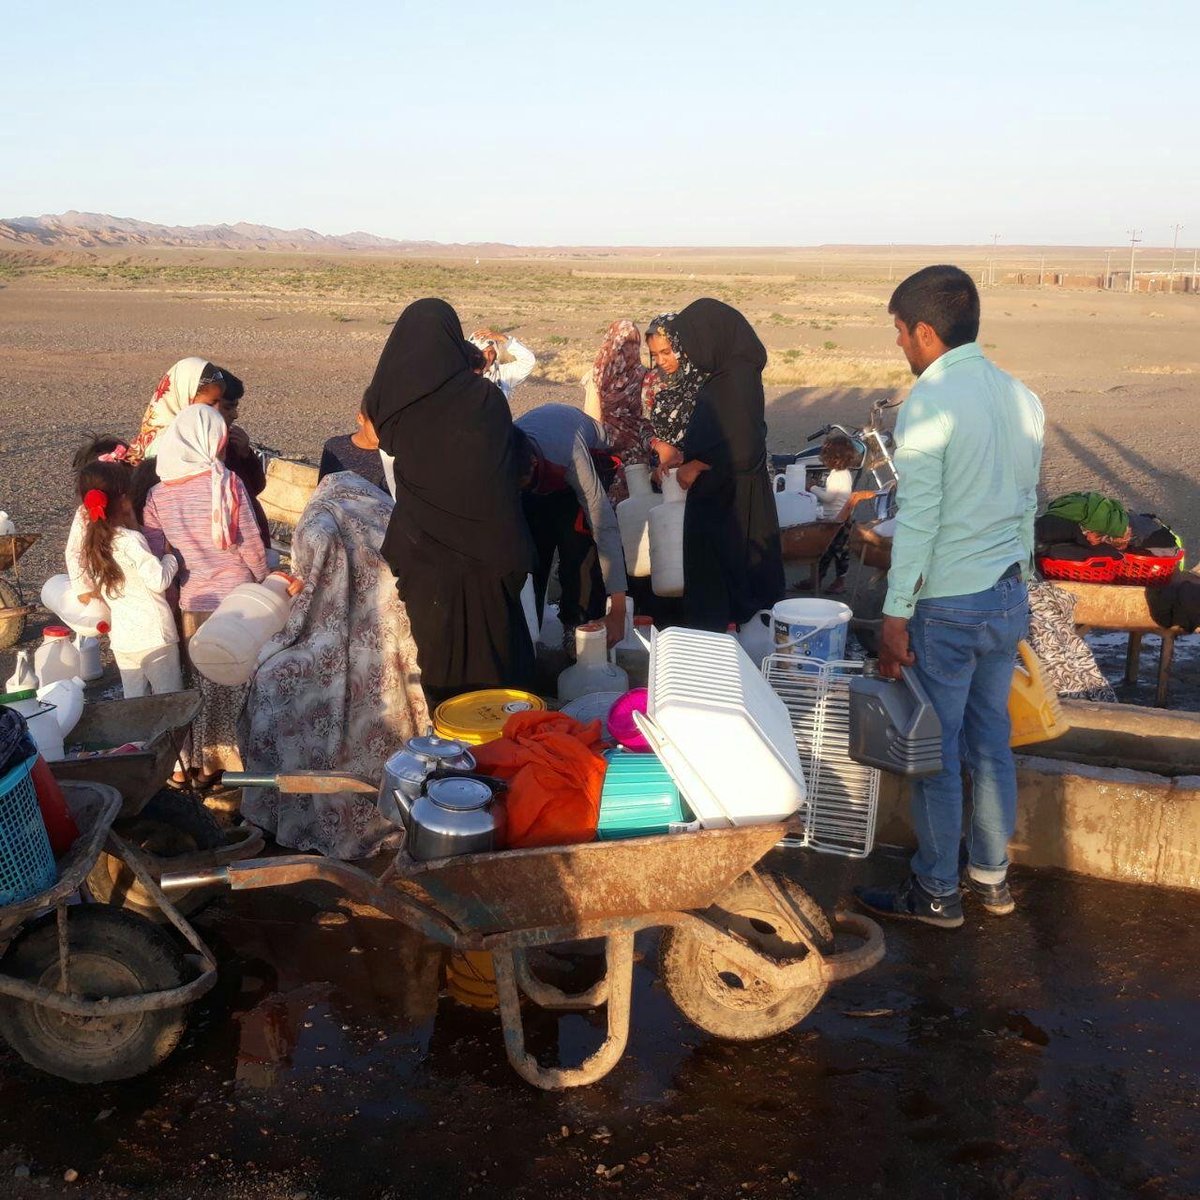 @Textive @SyediAhmad1 @absaruddin12 @Tweetively @zacktually @Saudi_20202020 This is IRAN 💪 ILNA state-run news agency: Due to lack of running water, women have to bring water from ponds that are 700m away from villages/most women suffering from spinal disk inflammation/5 pregnant women lost babies from carrying heavy water loads.